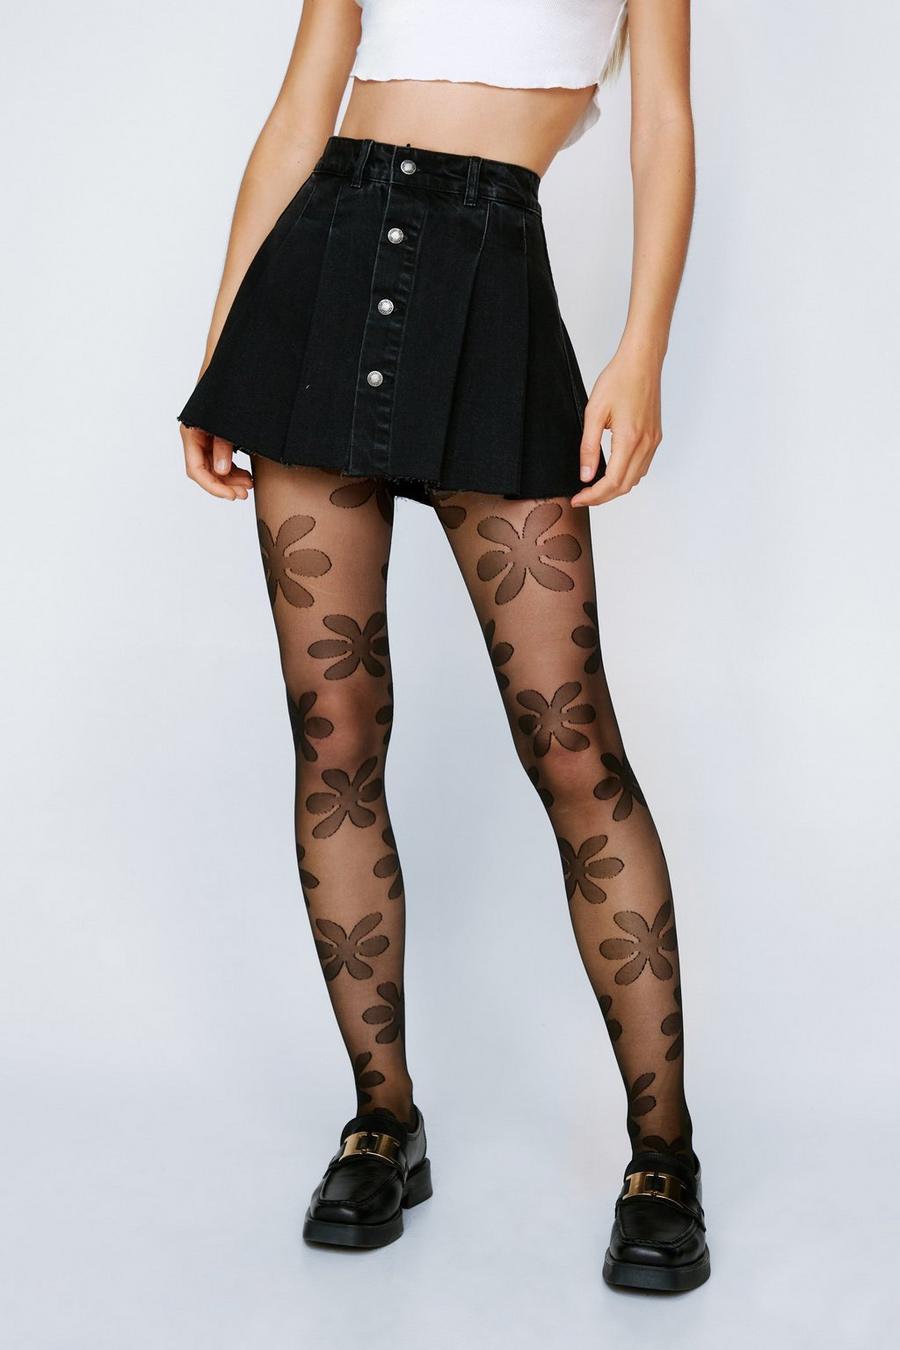 Flower Patterned Tights